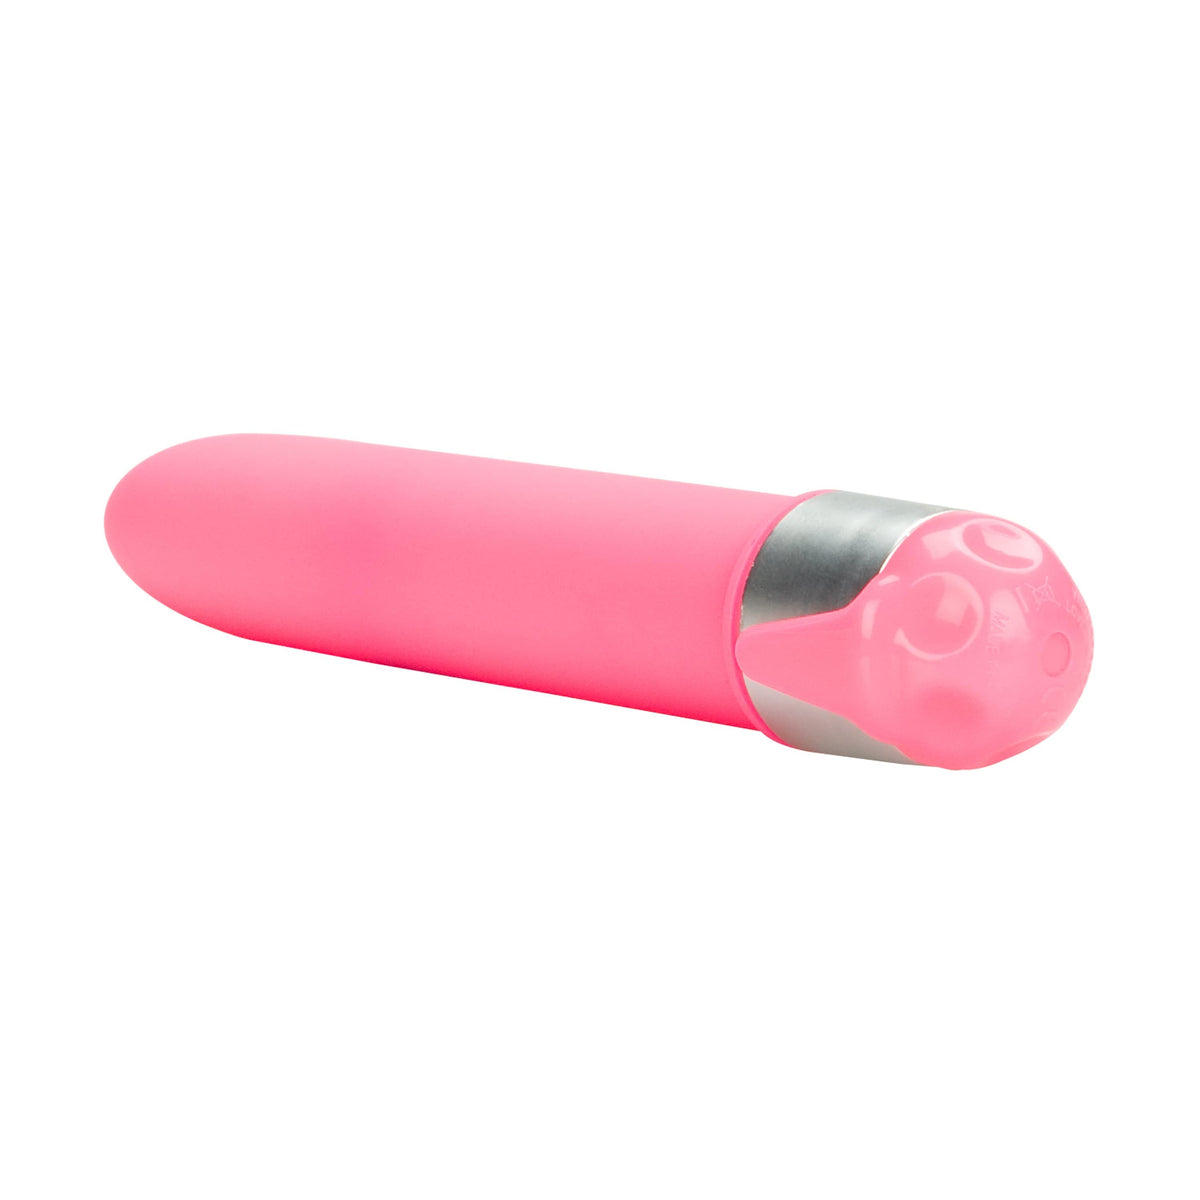 California Exotics - Shane&#39;s World Sorority Party Vibrator Nooner 4.75&quot; (Pink) Non Realistic Dildo w/o suction cup (Vibration) Non Rechargeable 716770060099 CherryAffairs